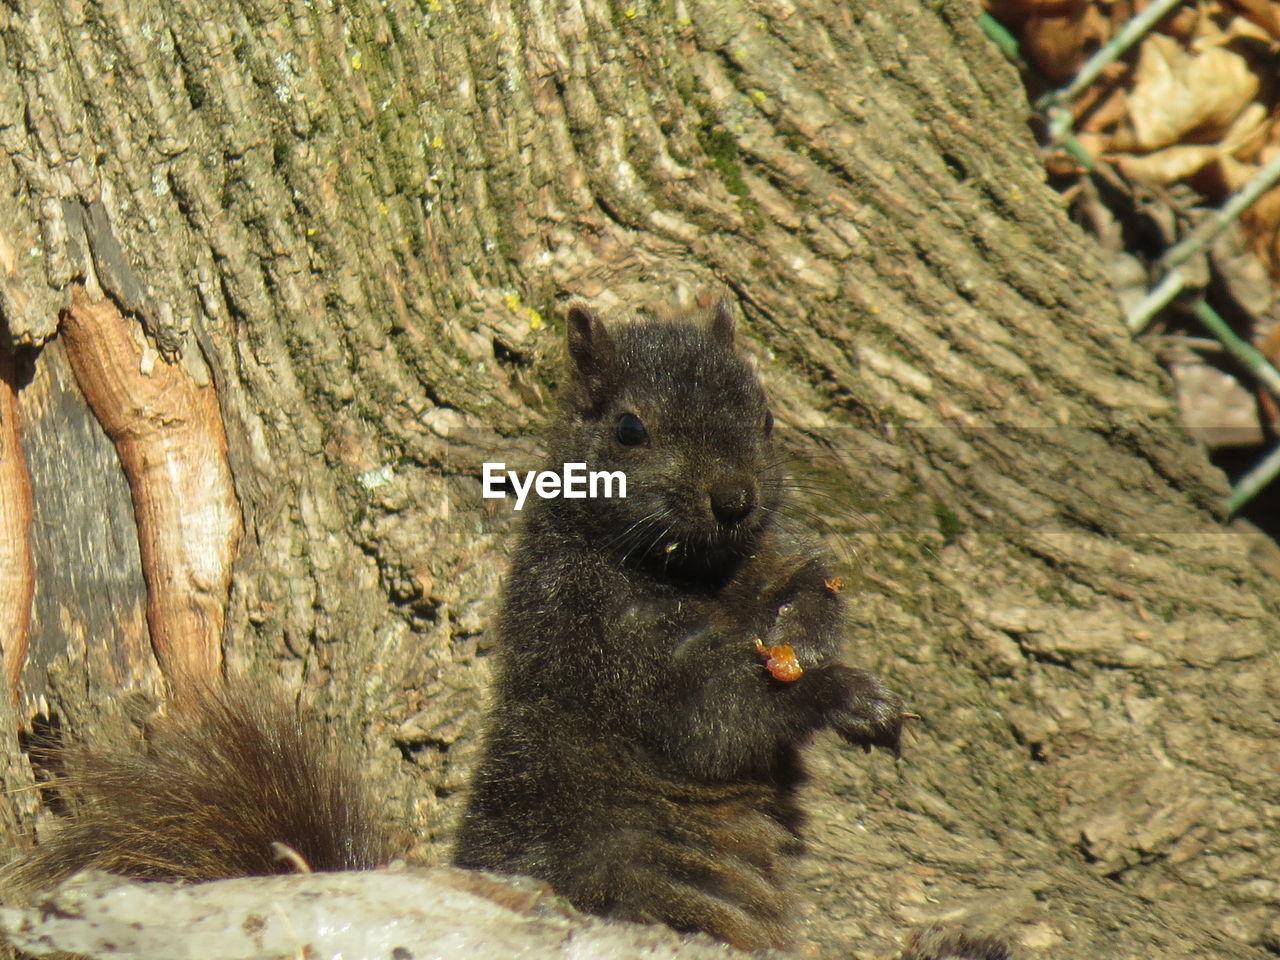 CLOSE-UP OF SQUIRREL ON TREE